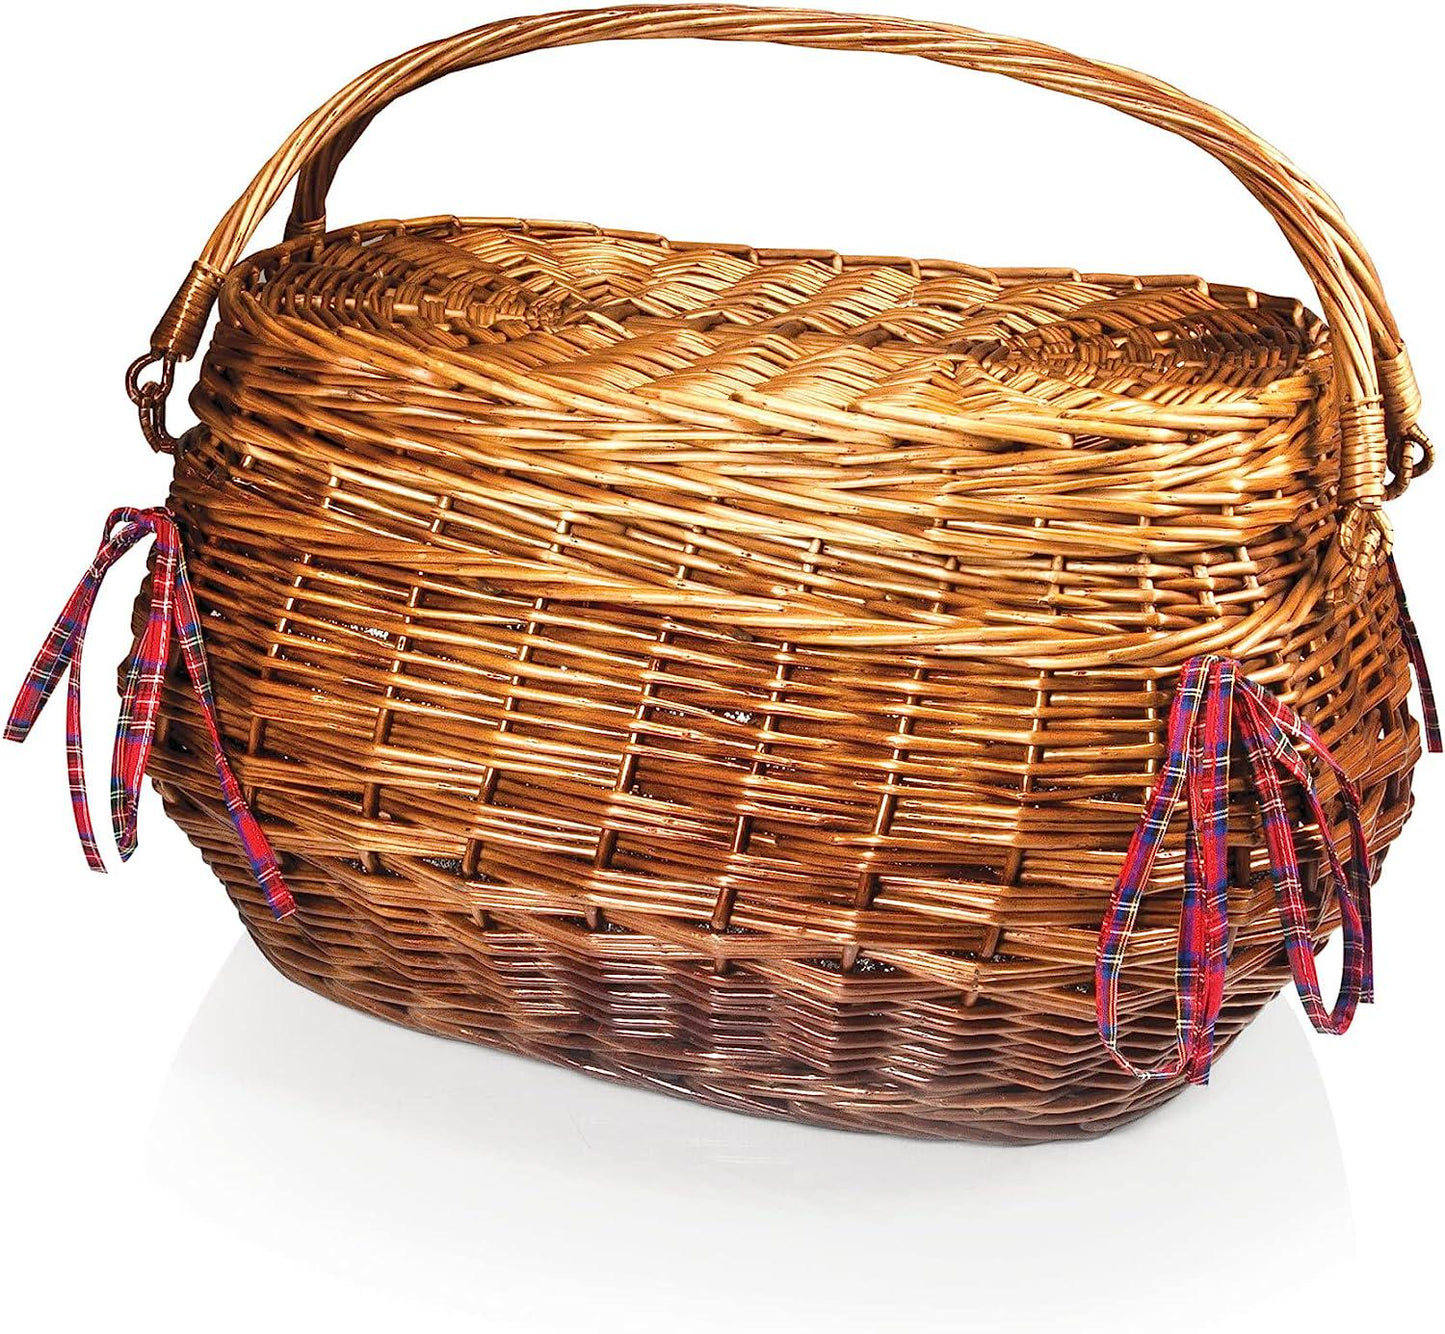 PICNIC TIME Highlander Deluxe Wicker Picnic Basket for 4 with Blanket and Wine Bag, One Size, Red and Blue Tartan Pattern